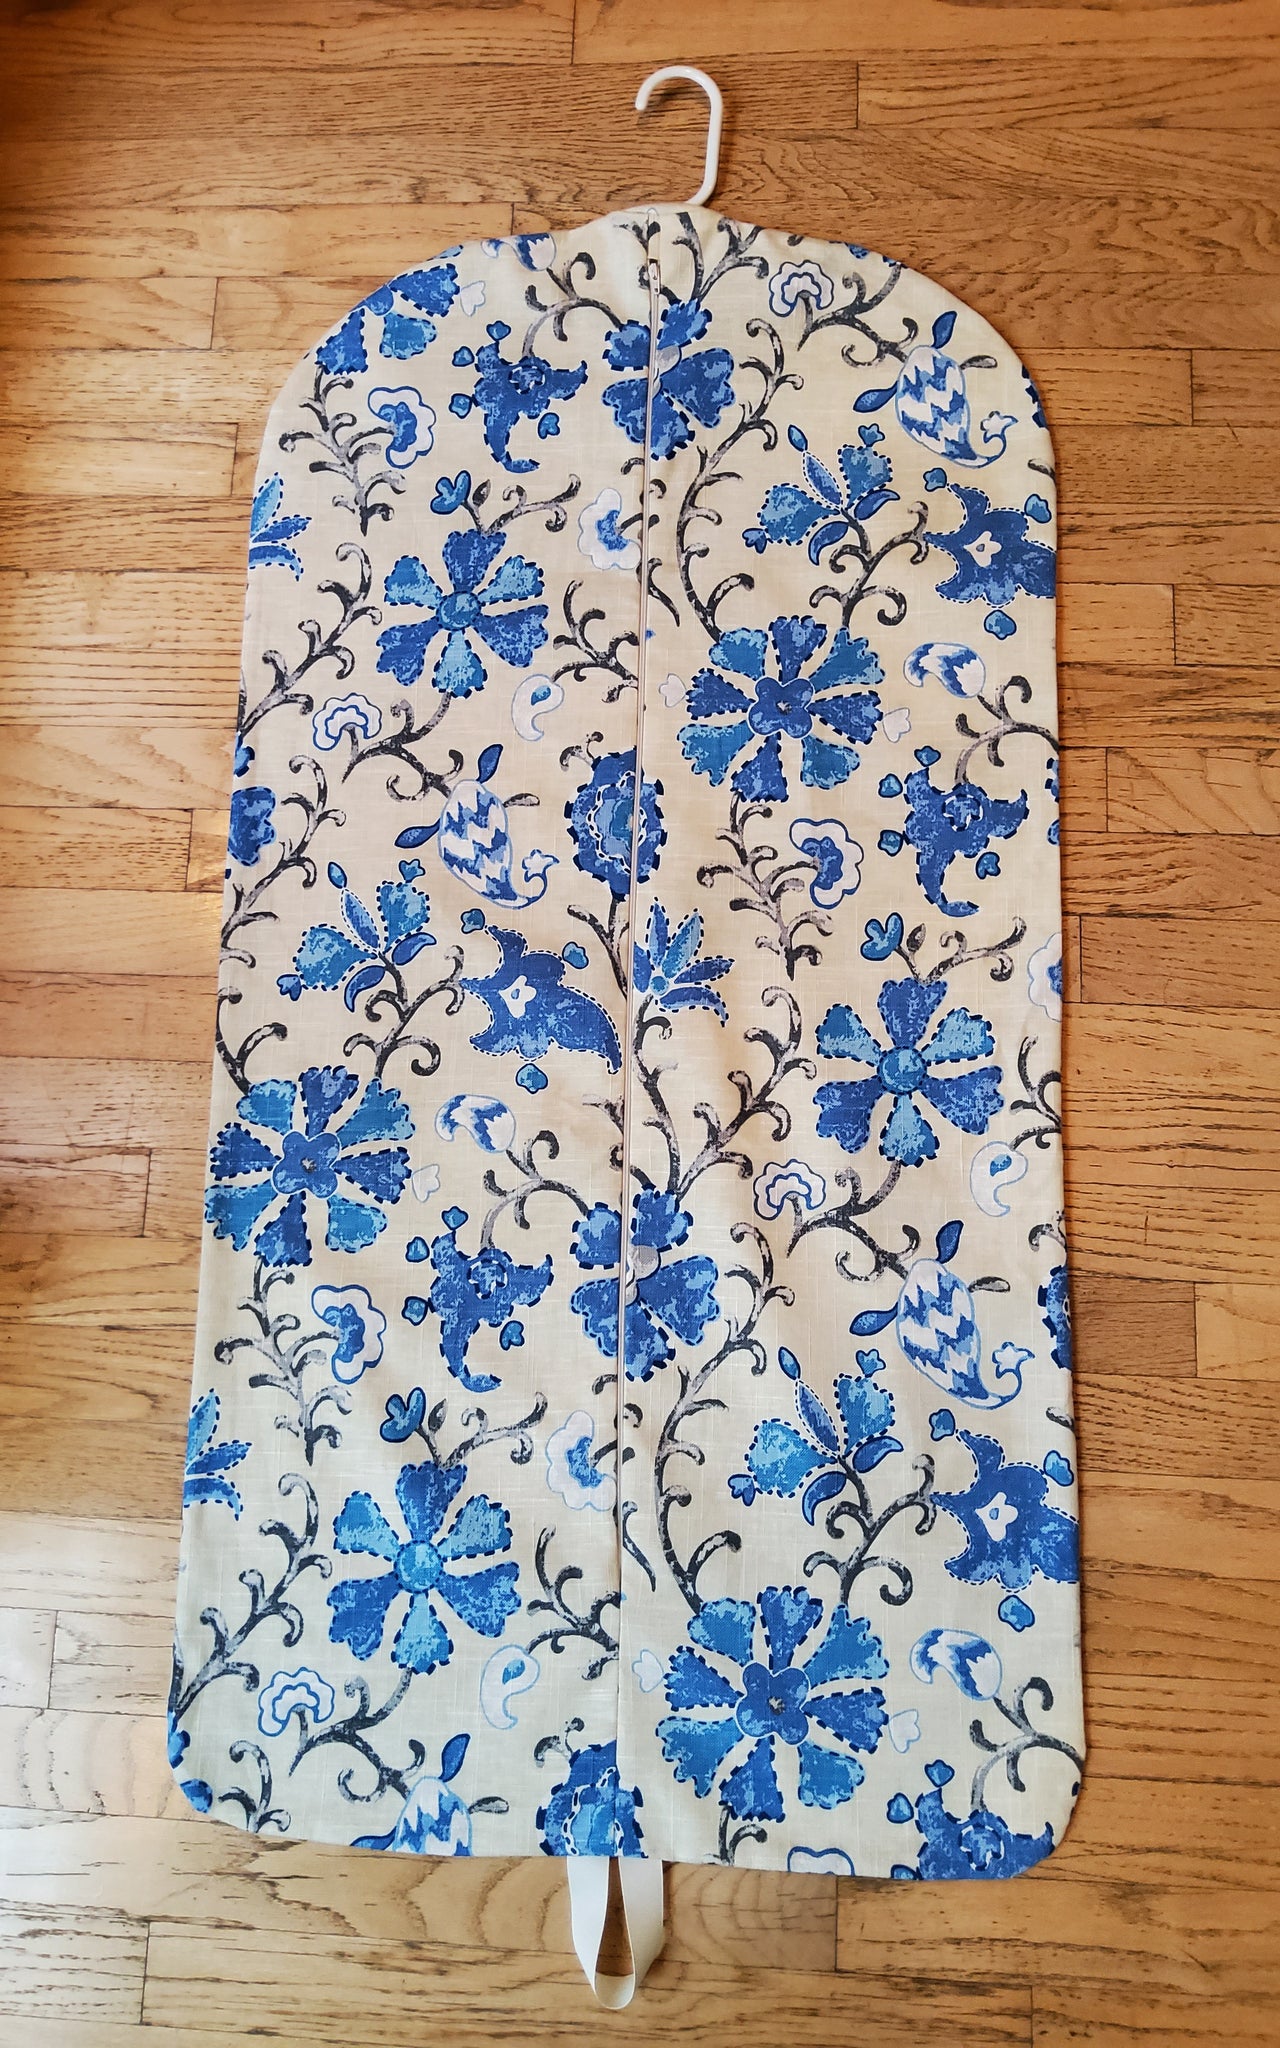 Where can I find a garment bag pattern for dress shirts and a suit? :  r/sewing